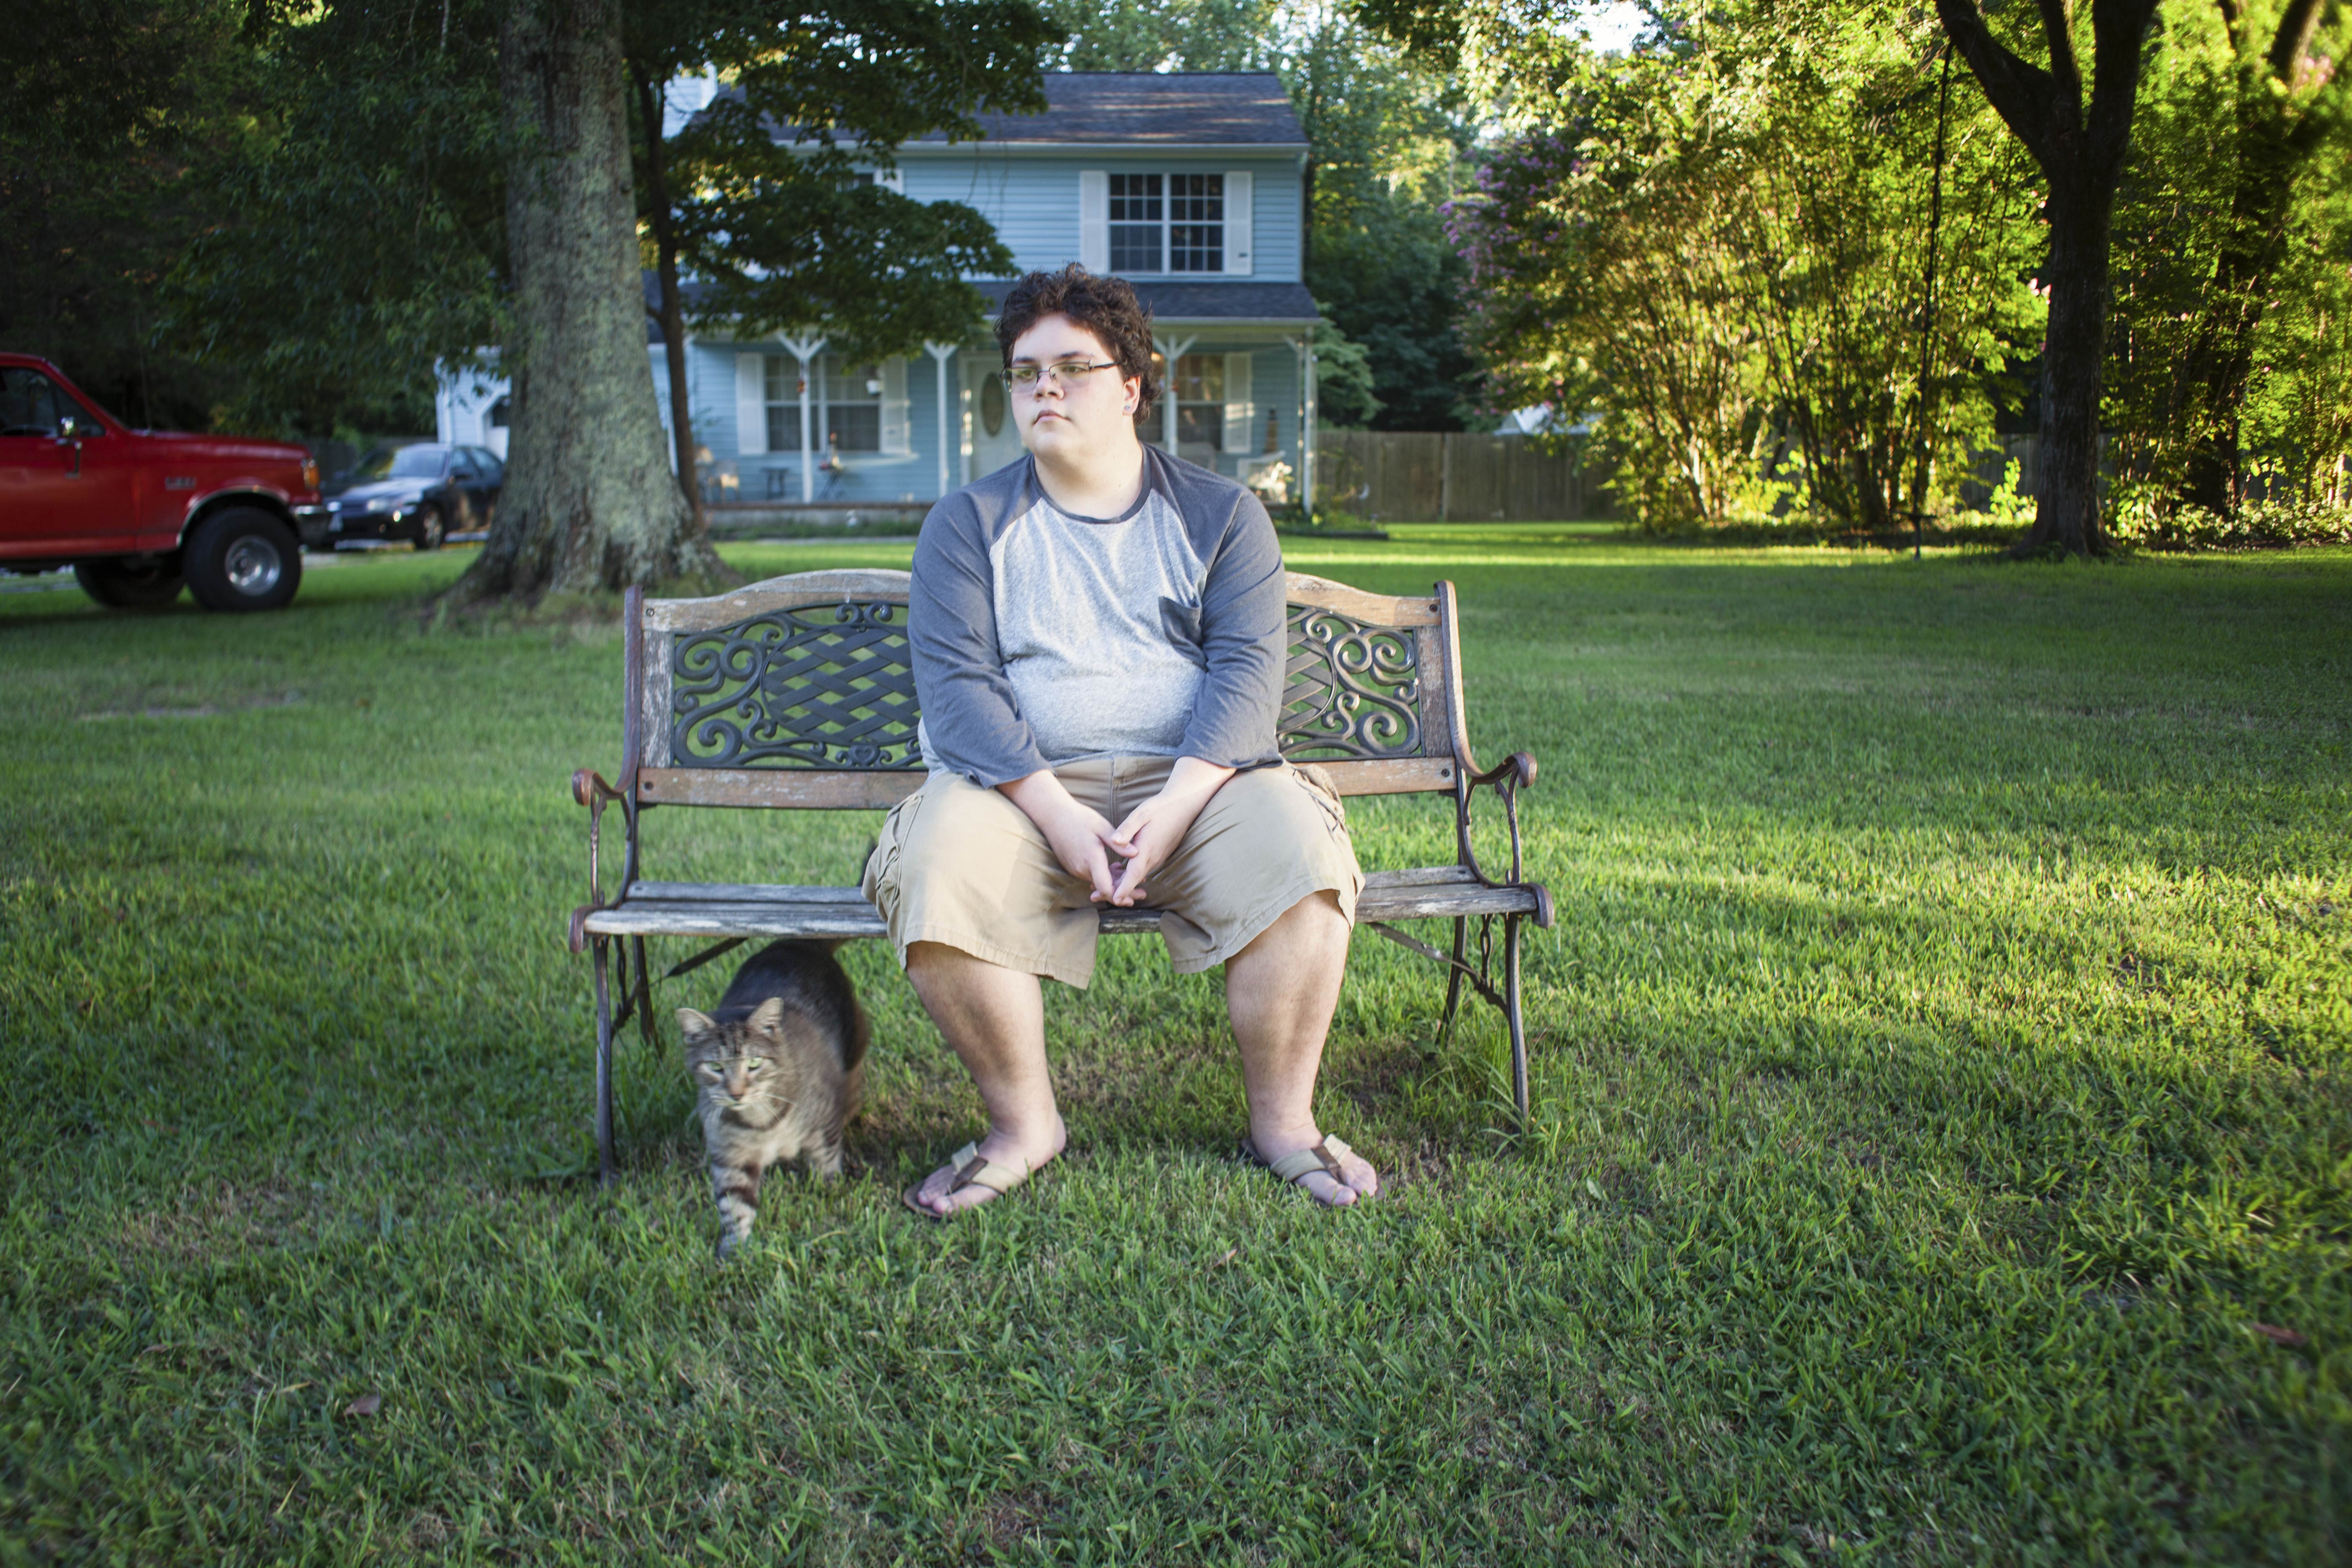 Gavin Grimm sits on a bench with a cat by his feet and a house and truck in the background.